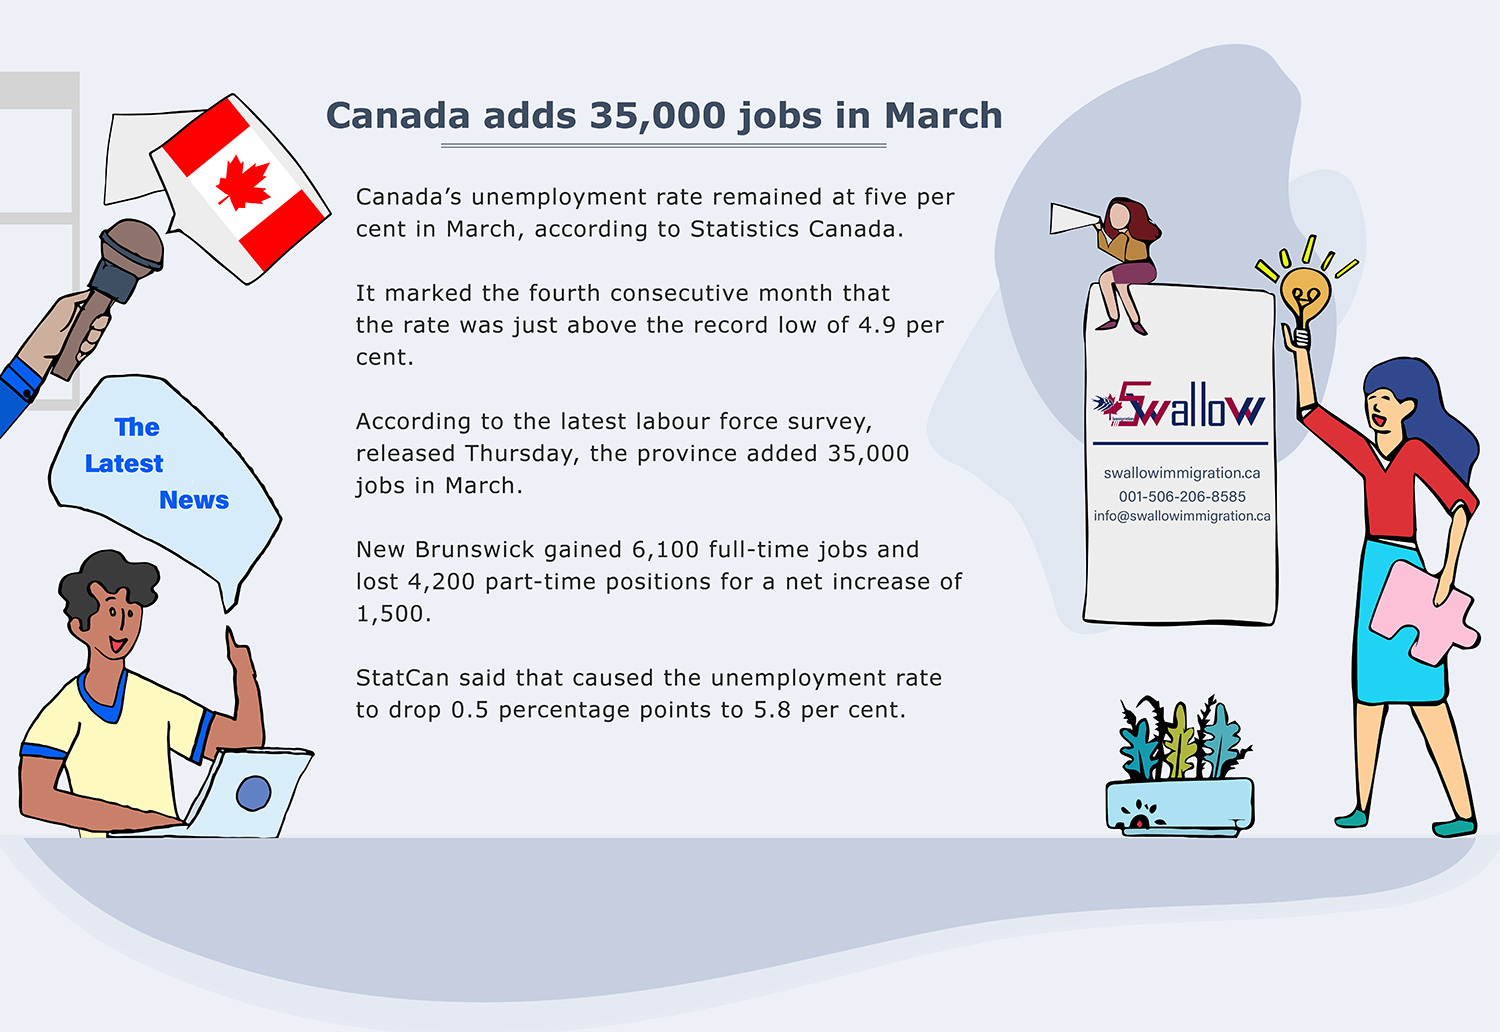 Canada adds 35,000 jobs in March